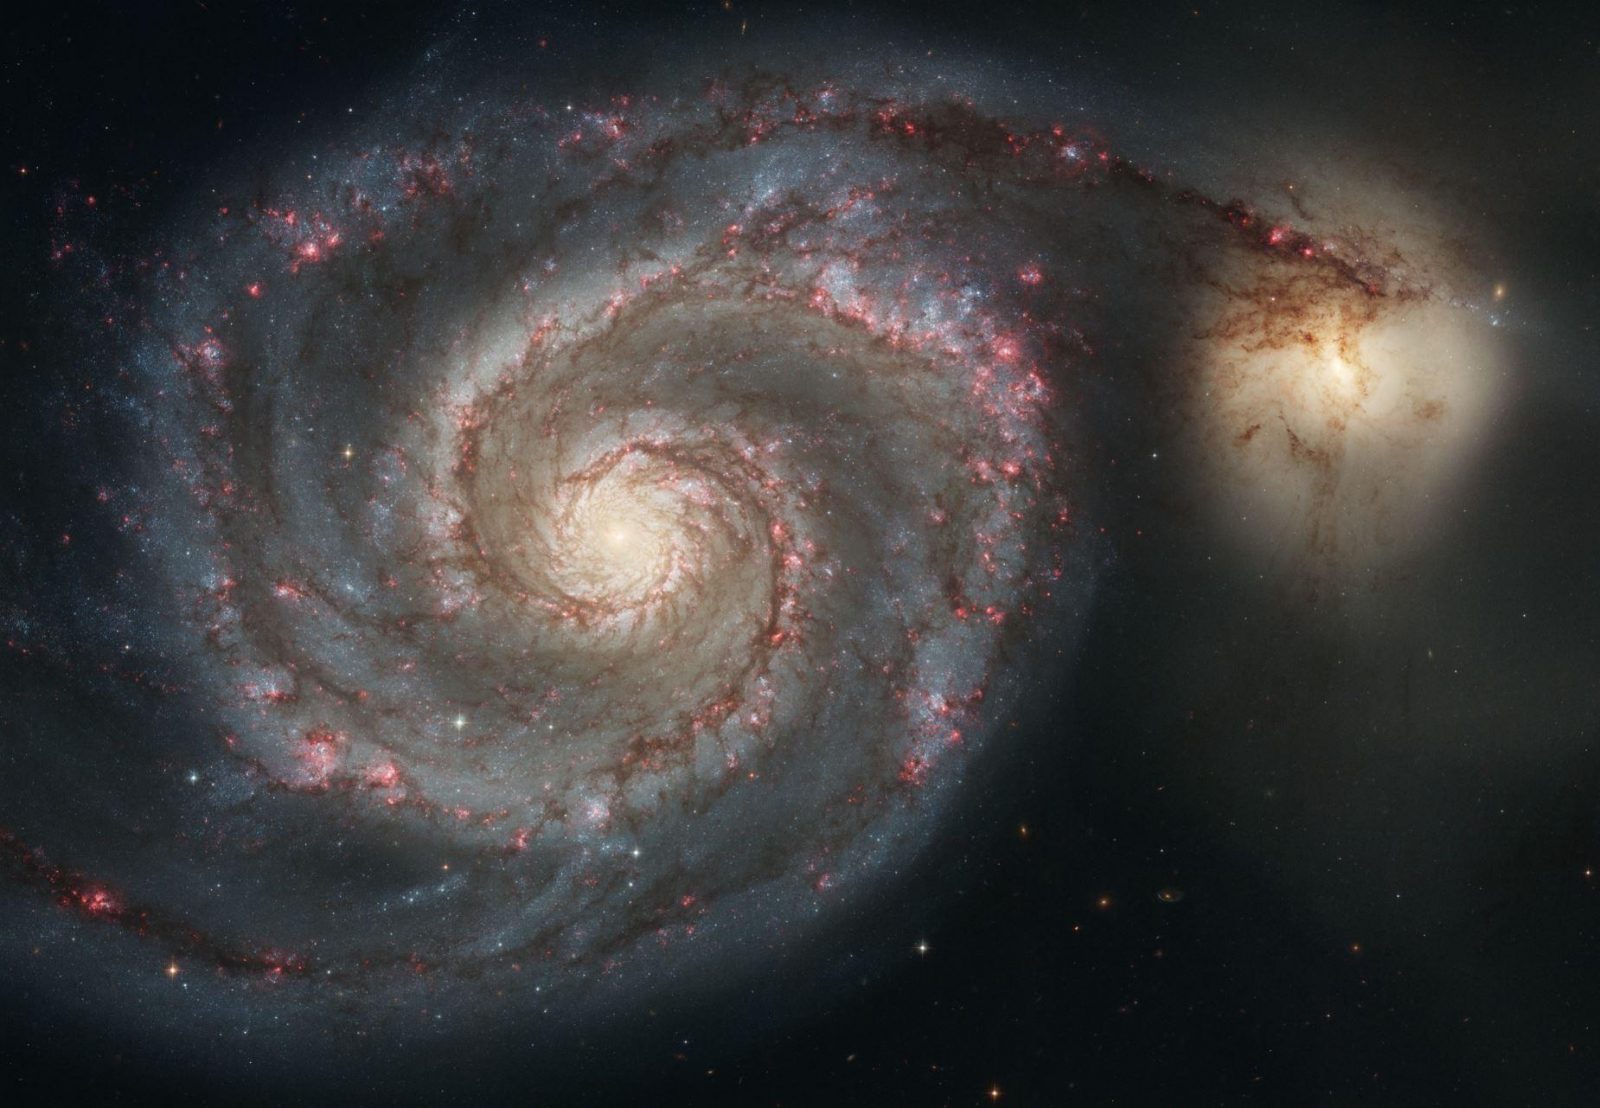 Hubble Telescope captures the perfect view of a spectacular spiral